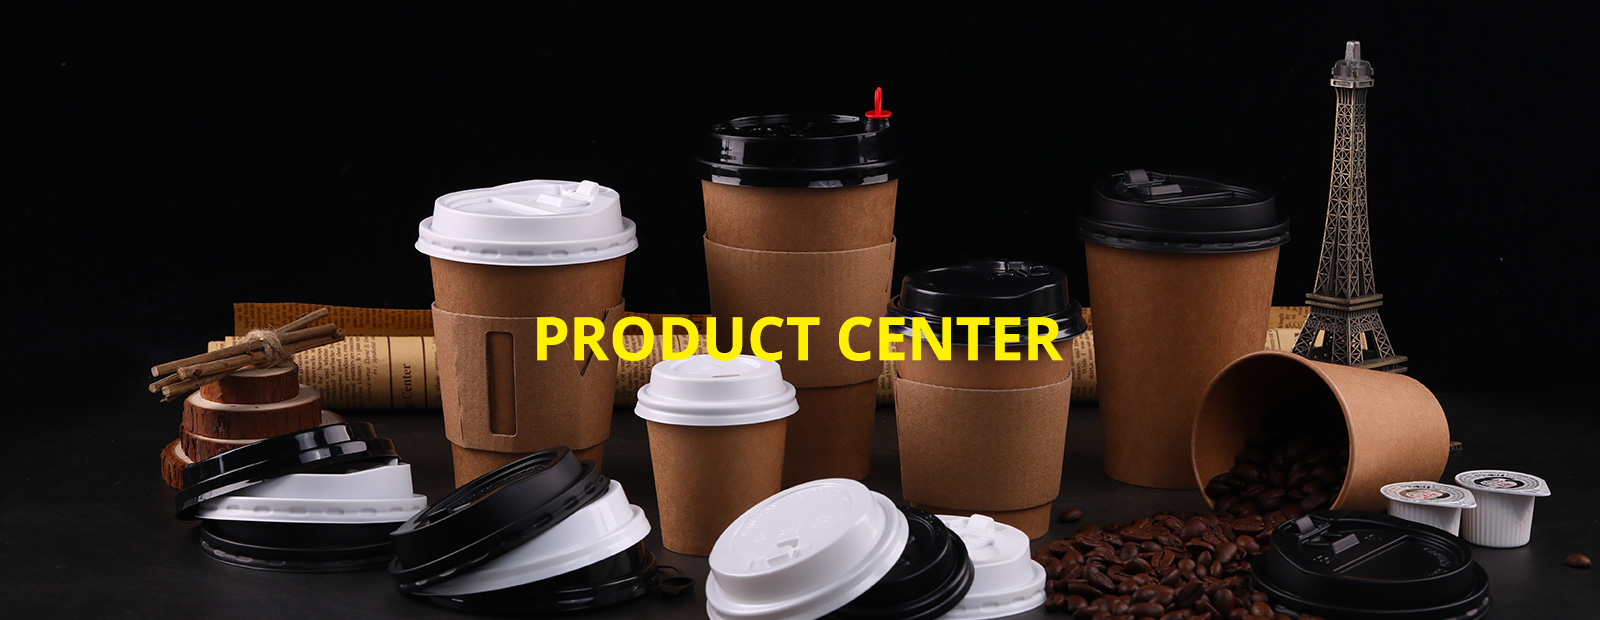 China product customize logo printed disposable paper bucket with lids for noodl